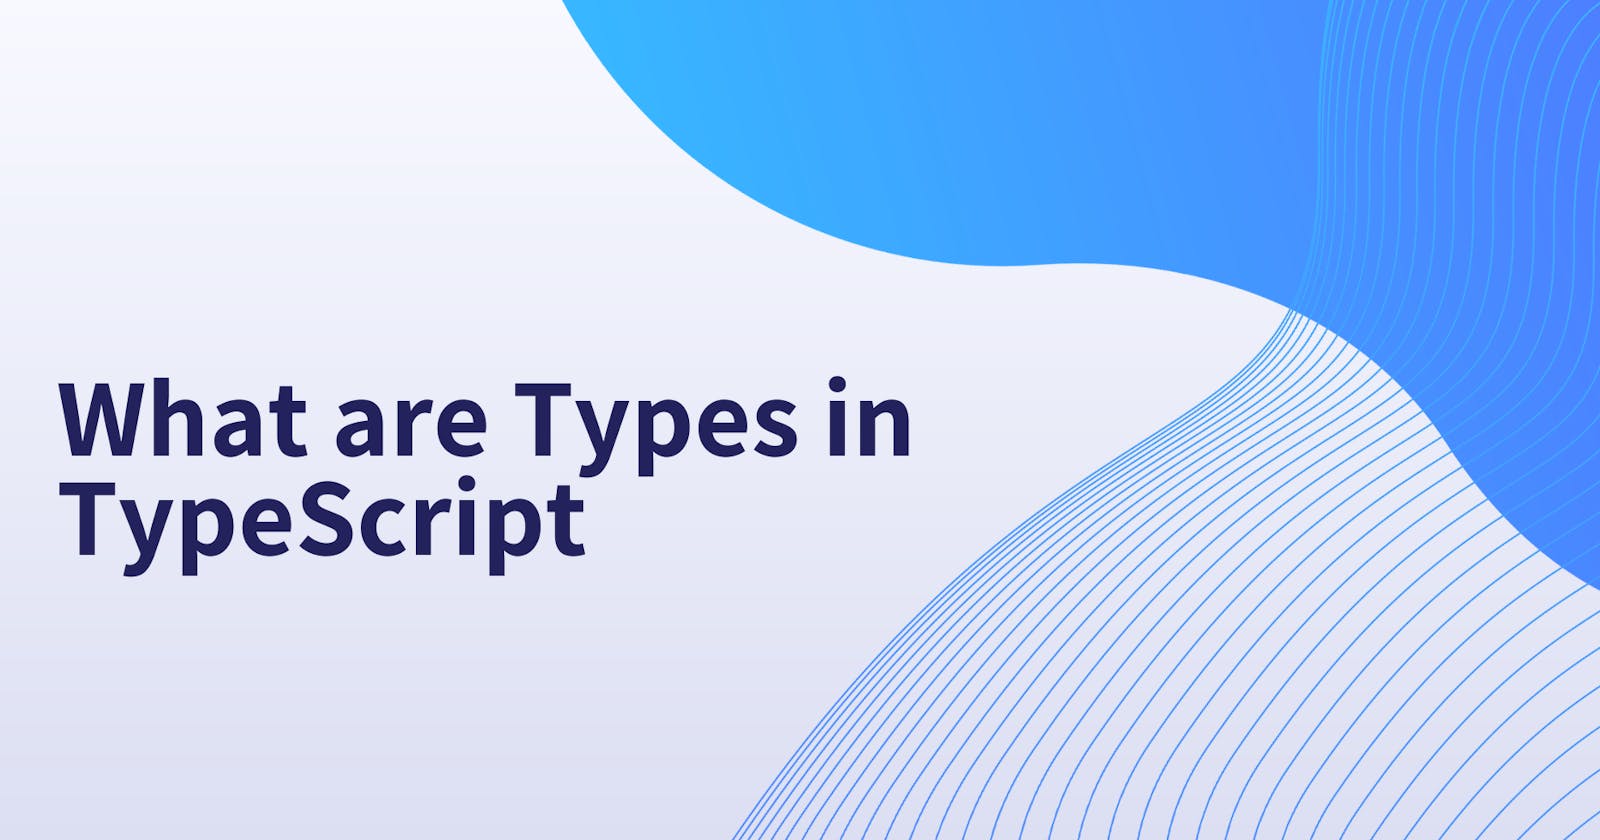 What are Types in TypeScript